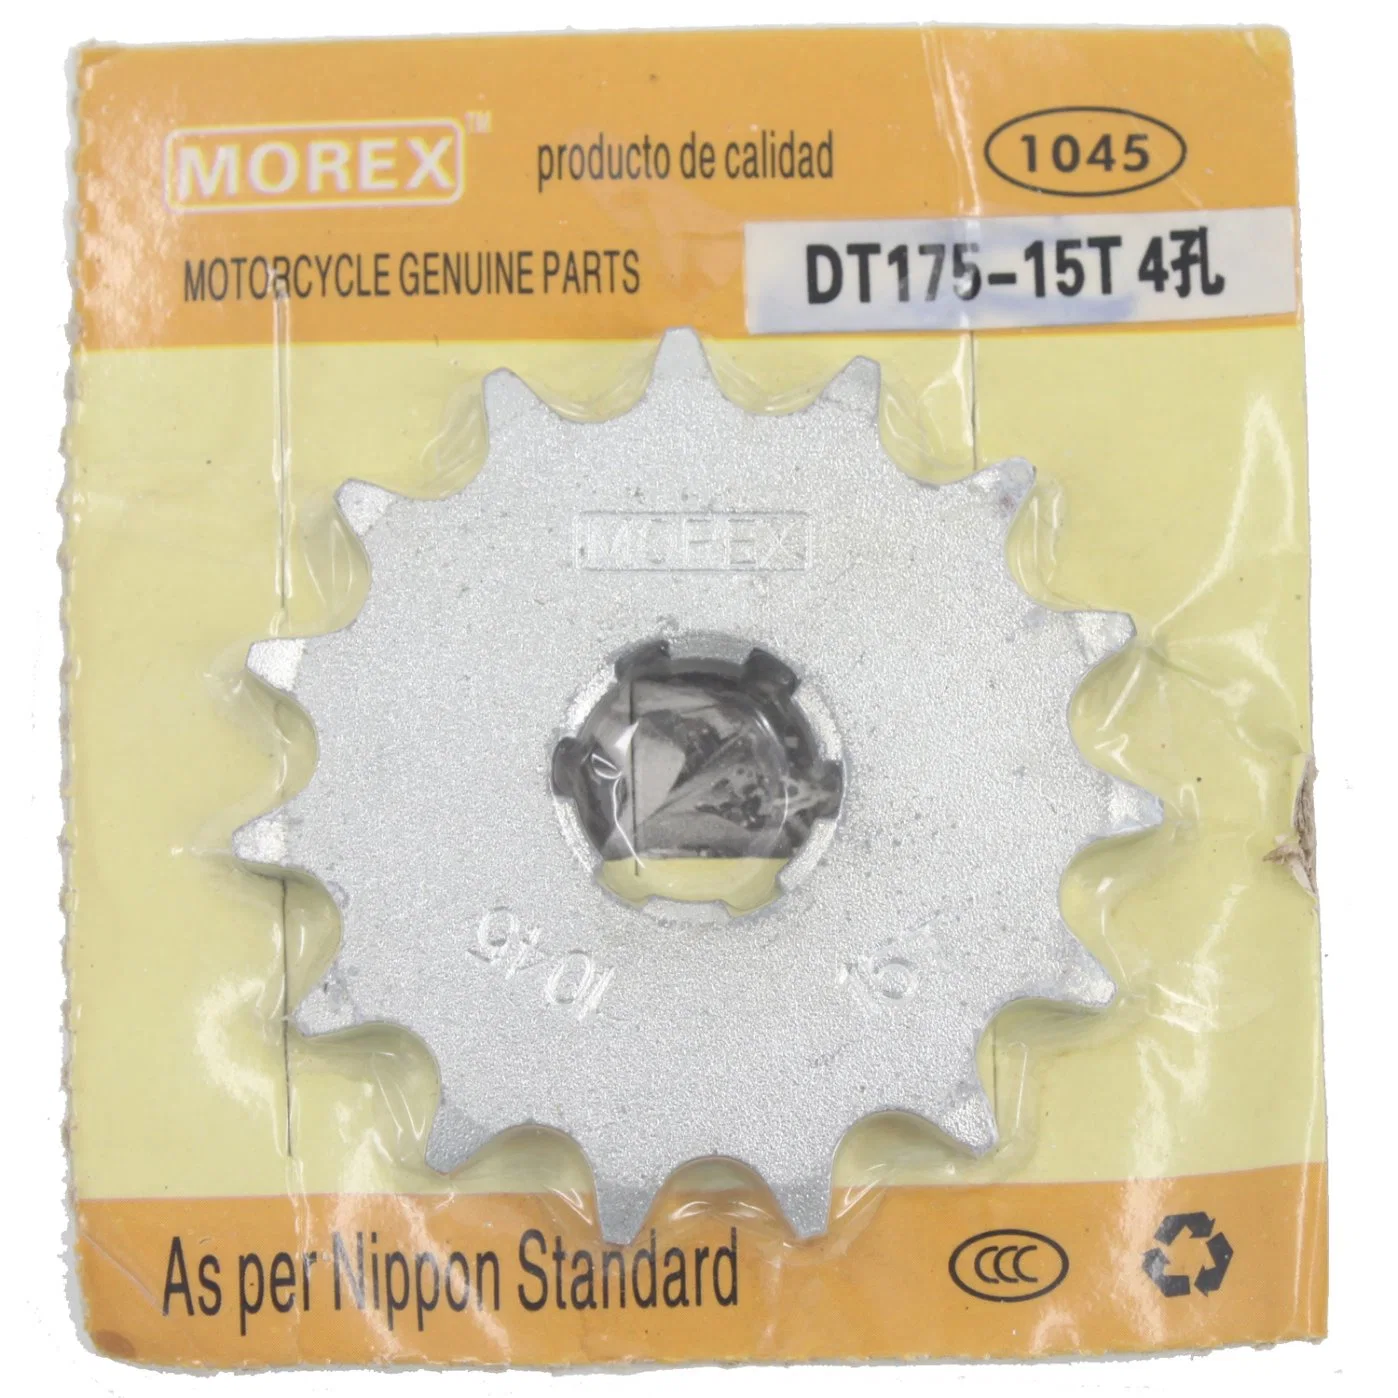 Motorcycle Spare Parts Accessories Original Morex Genuine Main Chain Sprocket Kit for YAMAHA Dt-175 15t